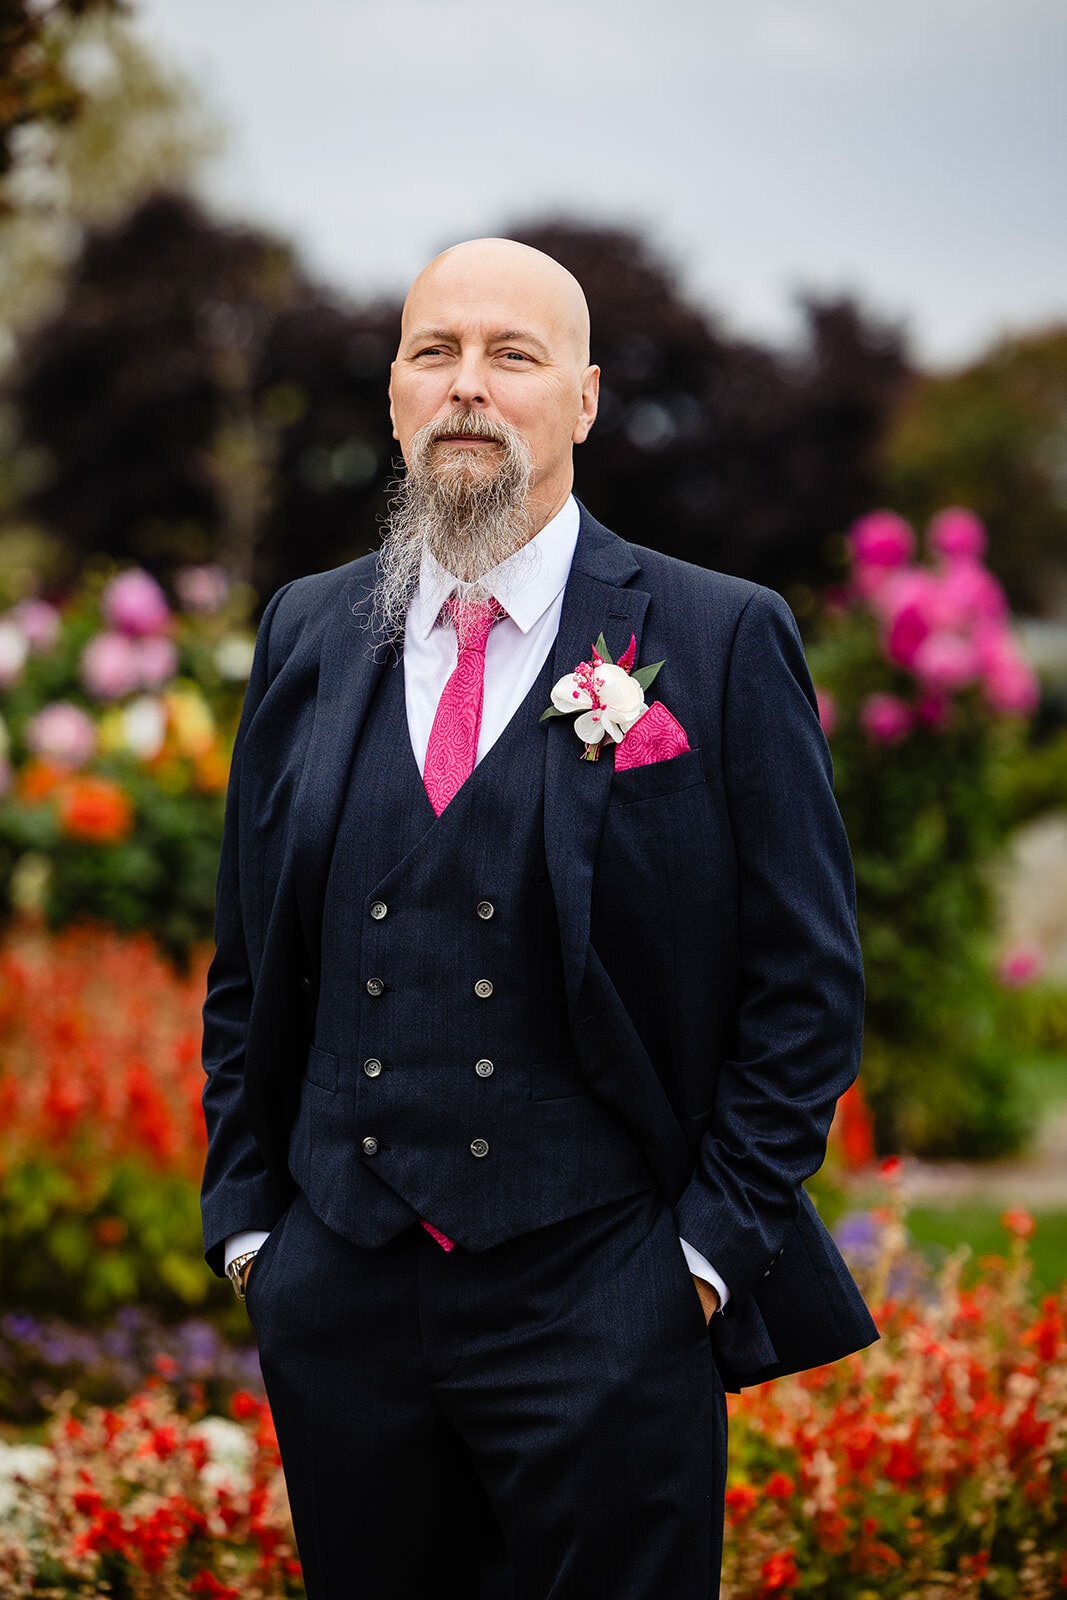 A groom standing confidently in a formal blue suit with a pink tie and a flower boutonnière, posing in front of a vibrant flower garden